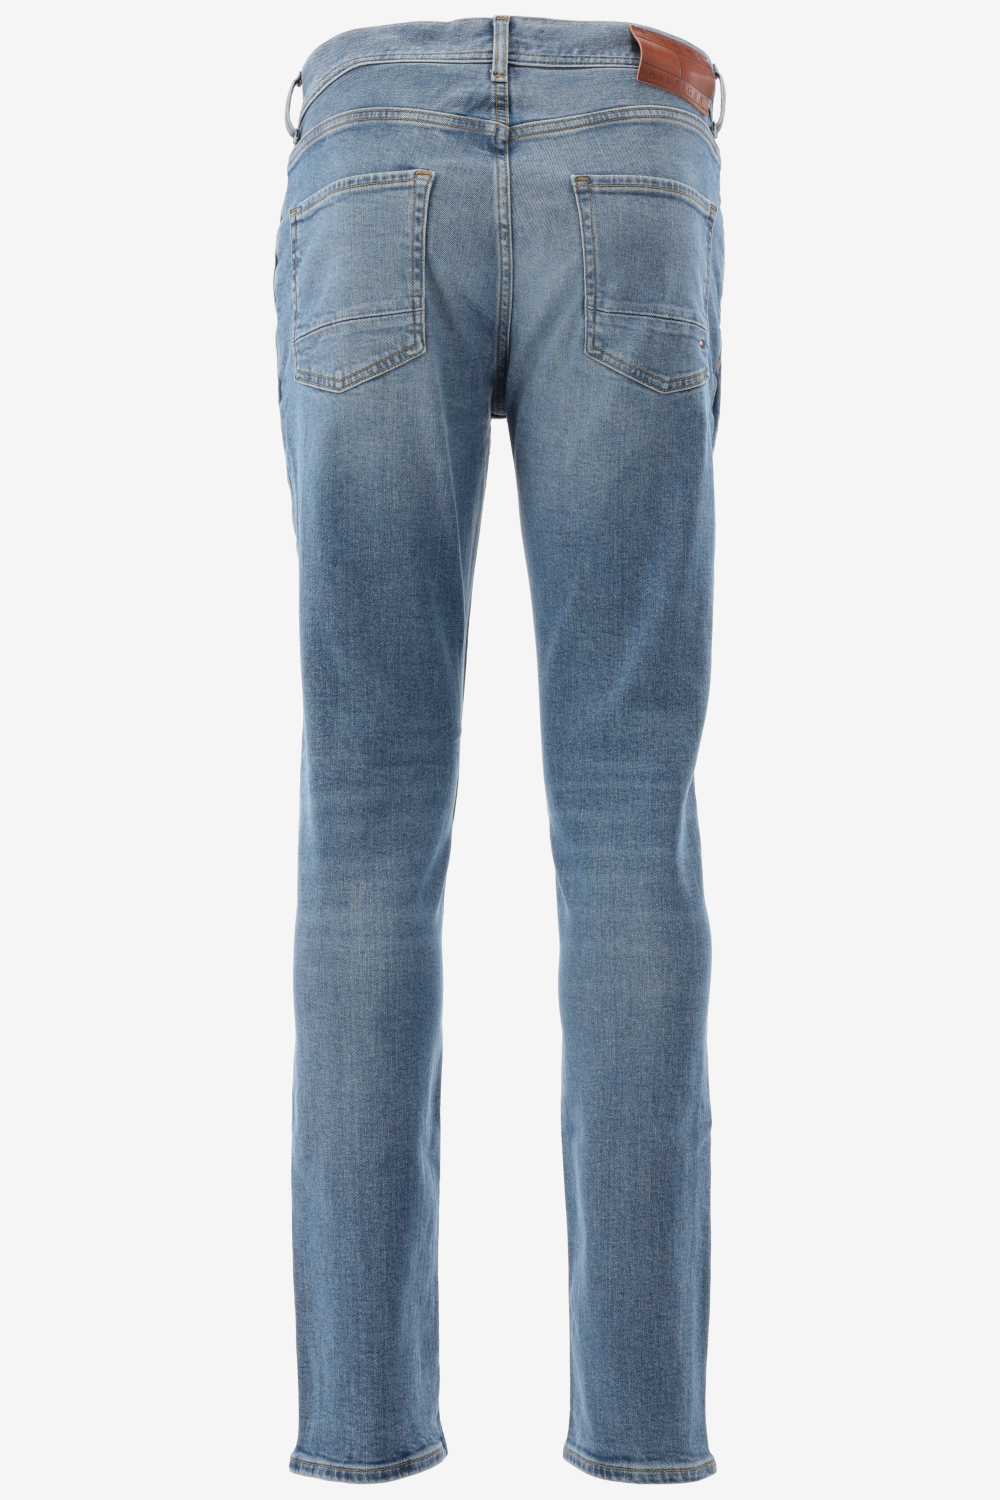 Tommy Hilfiger Straight Fit DENTON STRAIGHT JEANS